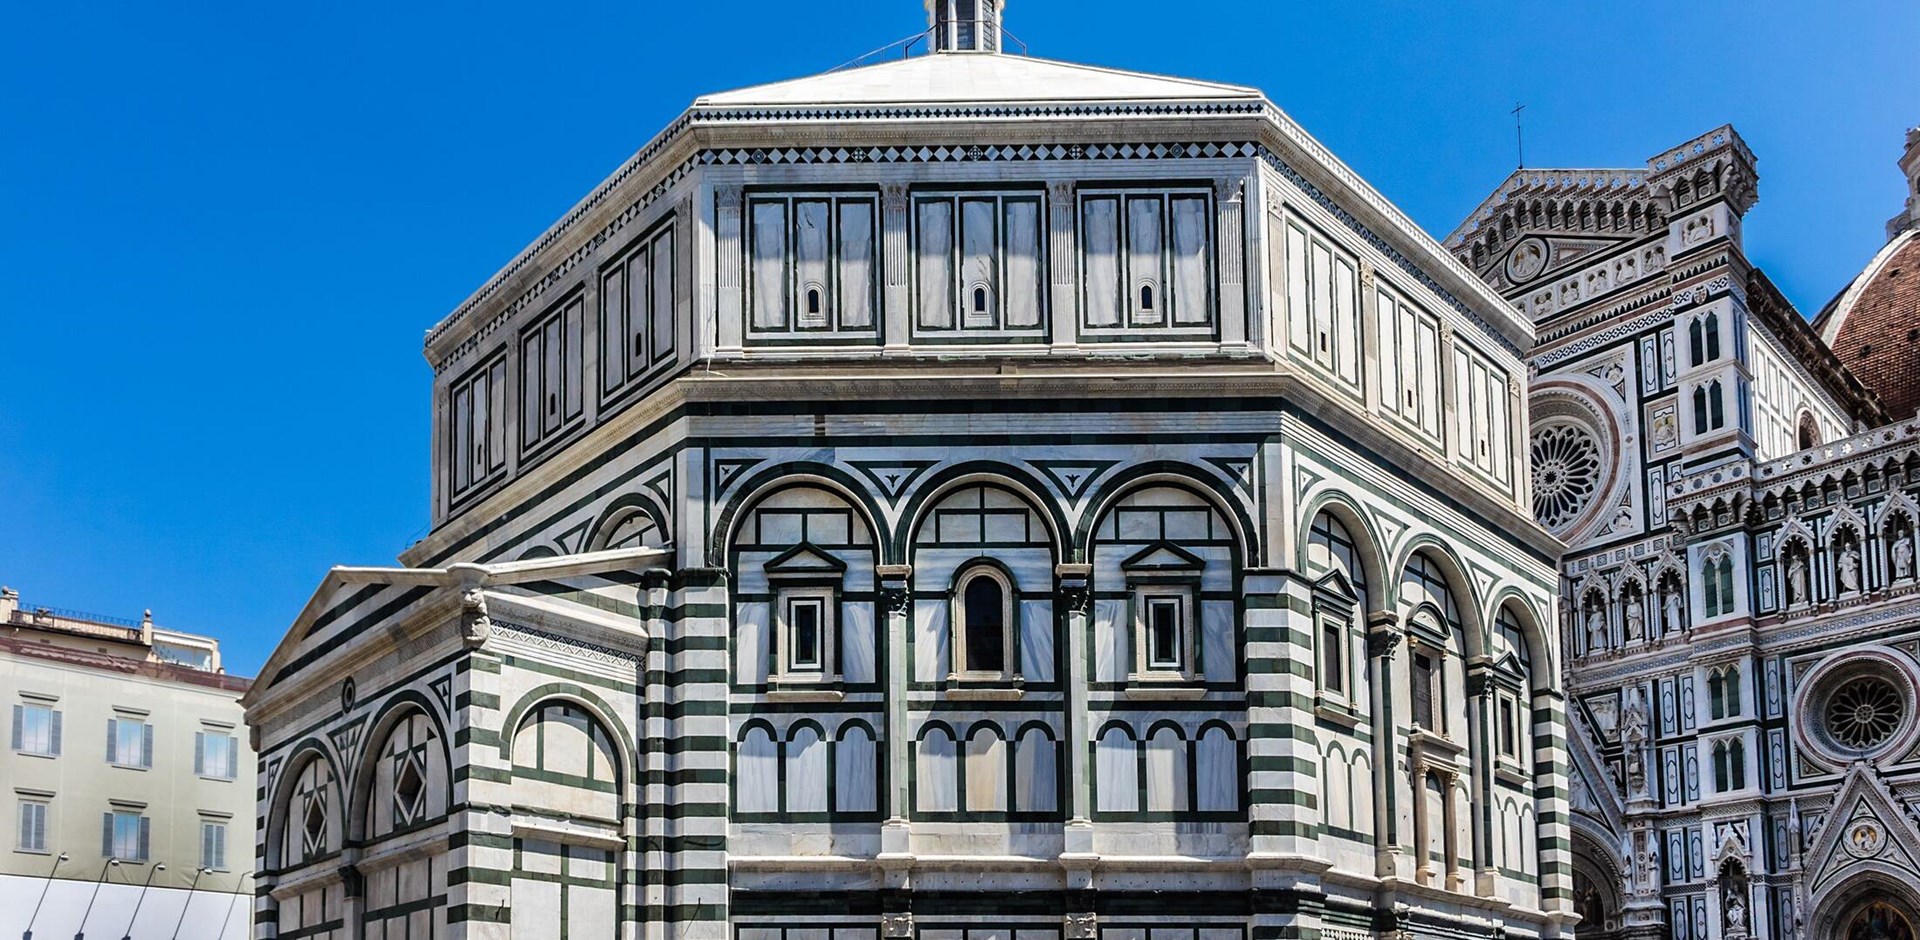 The octagonal Baptistery of Saint John (1059 - 1128), located in Piazza del Duomo, is one of Florence's oldest buildings and predates the Santa Maria del Fiore cathedral. Florence, Italy.